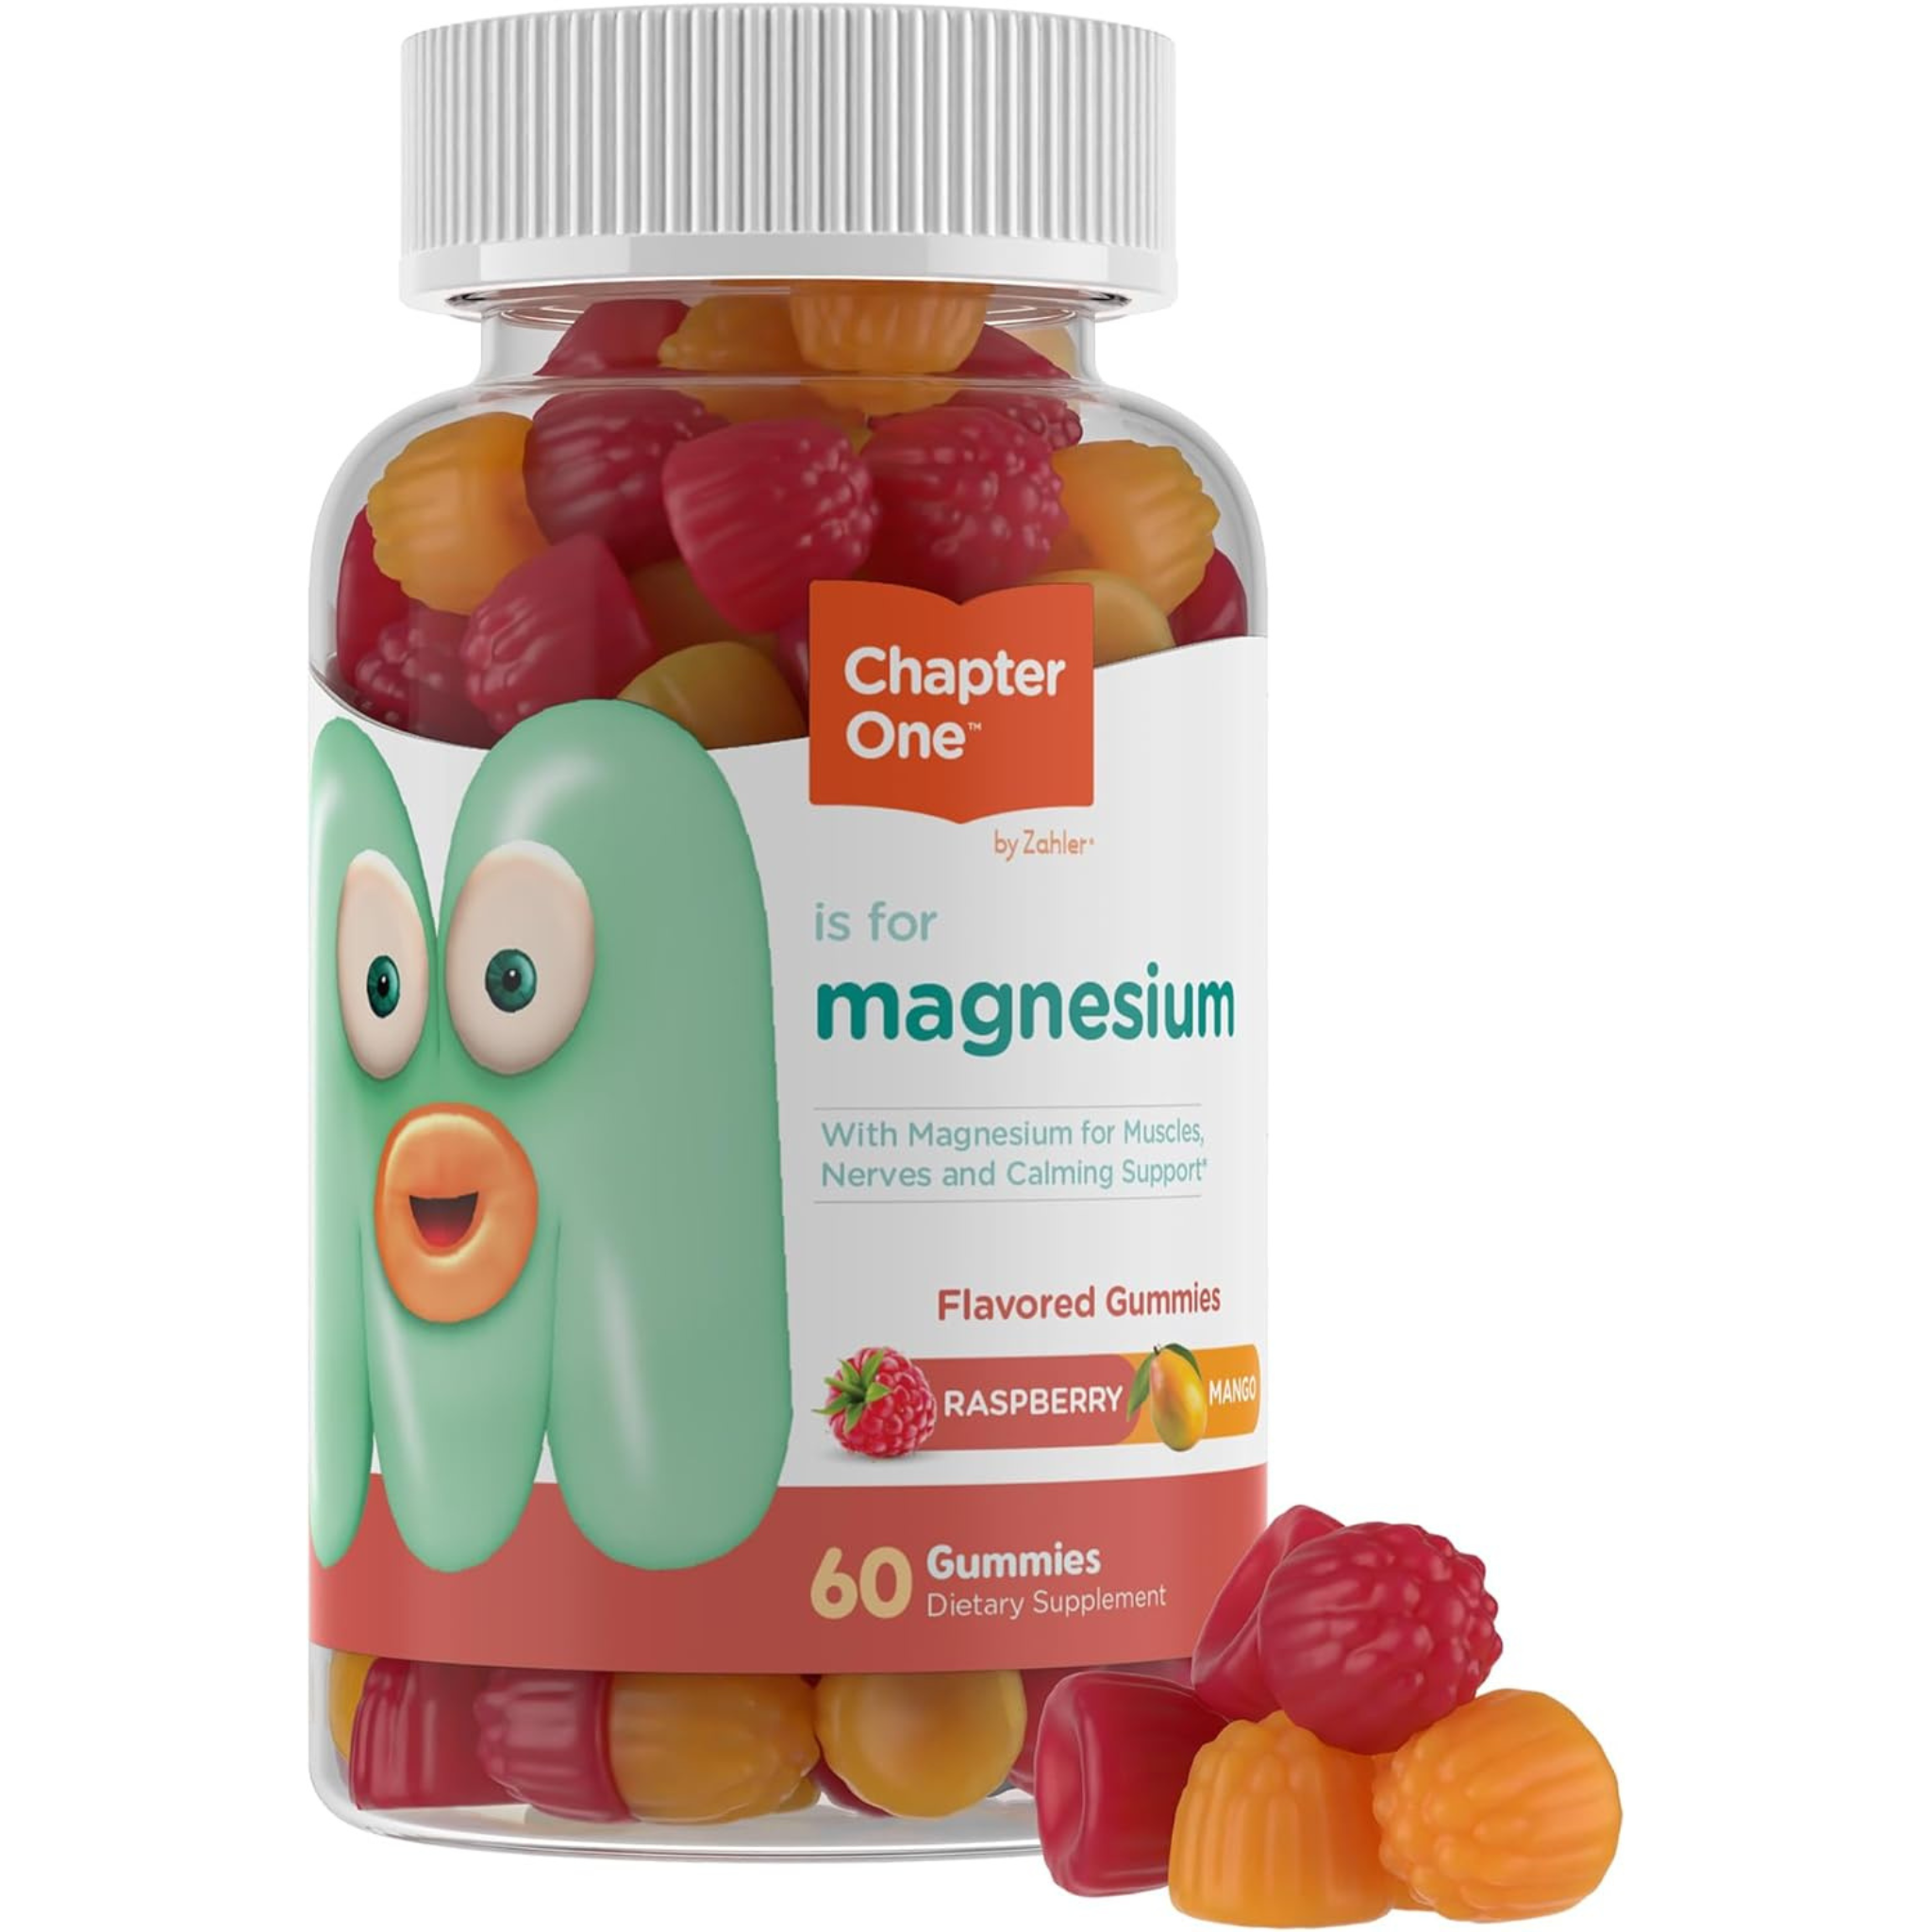 Chapter One Magnesium Gummies, Raspberry and Mango Flavored (60 Flavored Gummies)